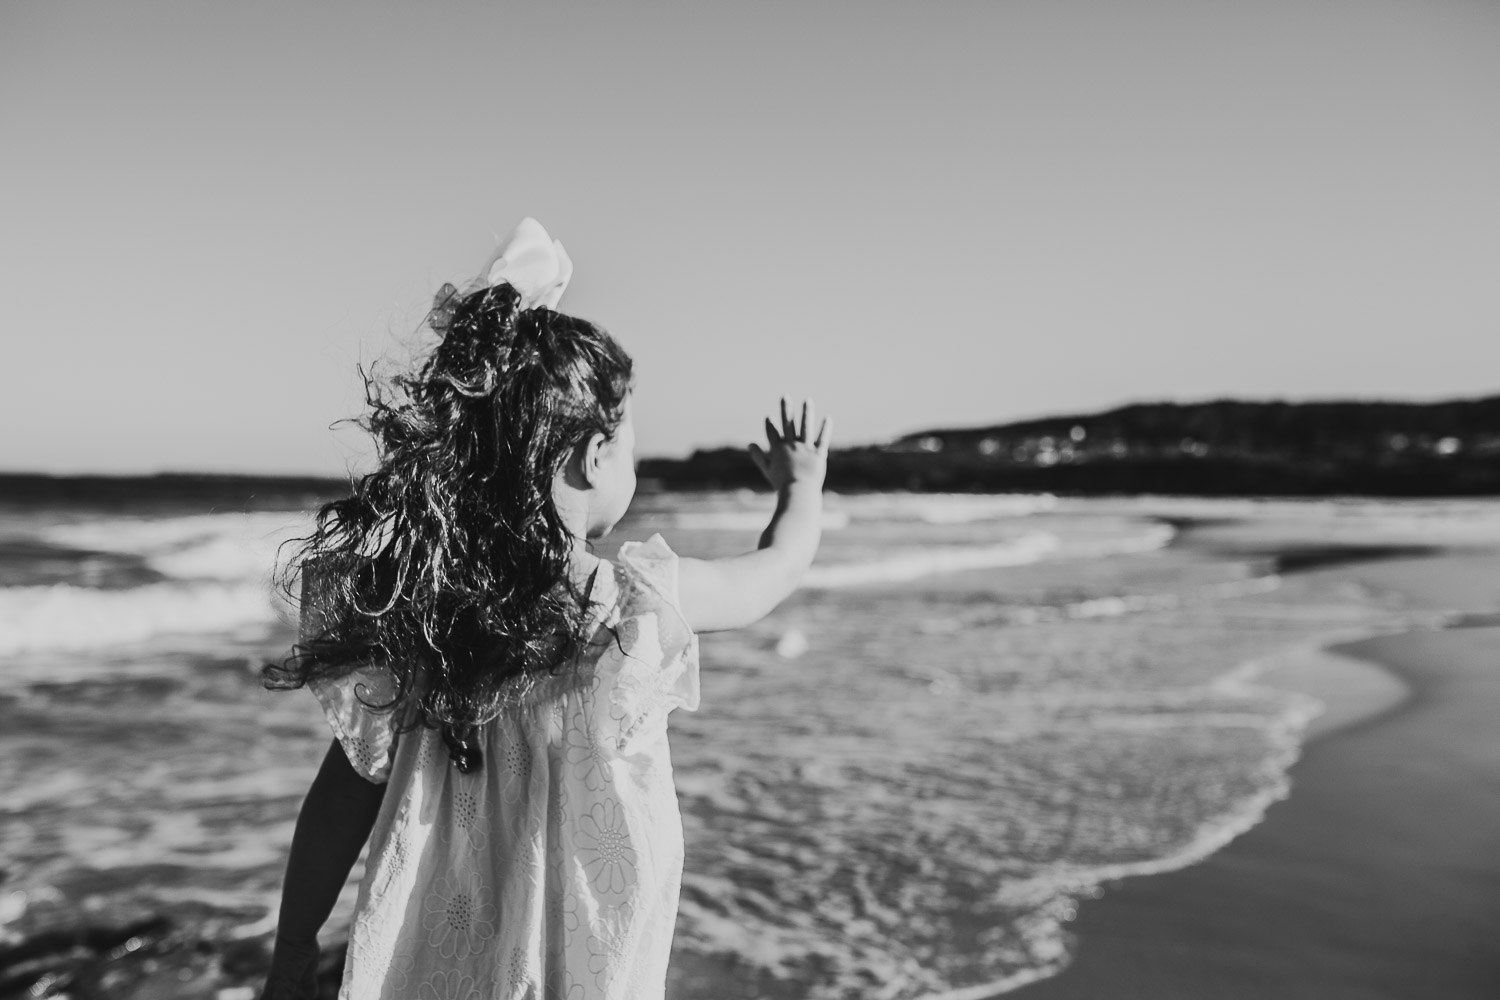 Black and white image of young girl facing away at the beach